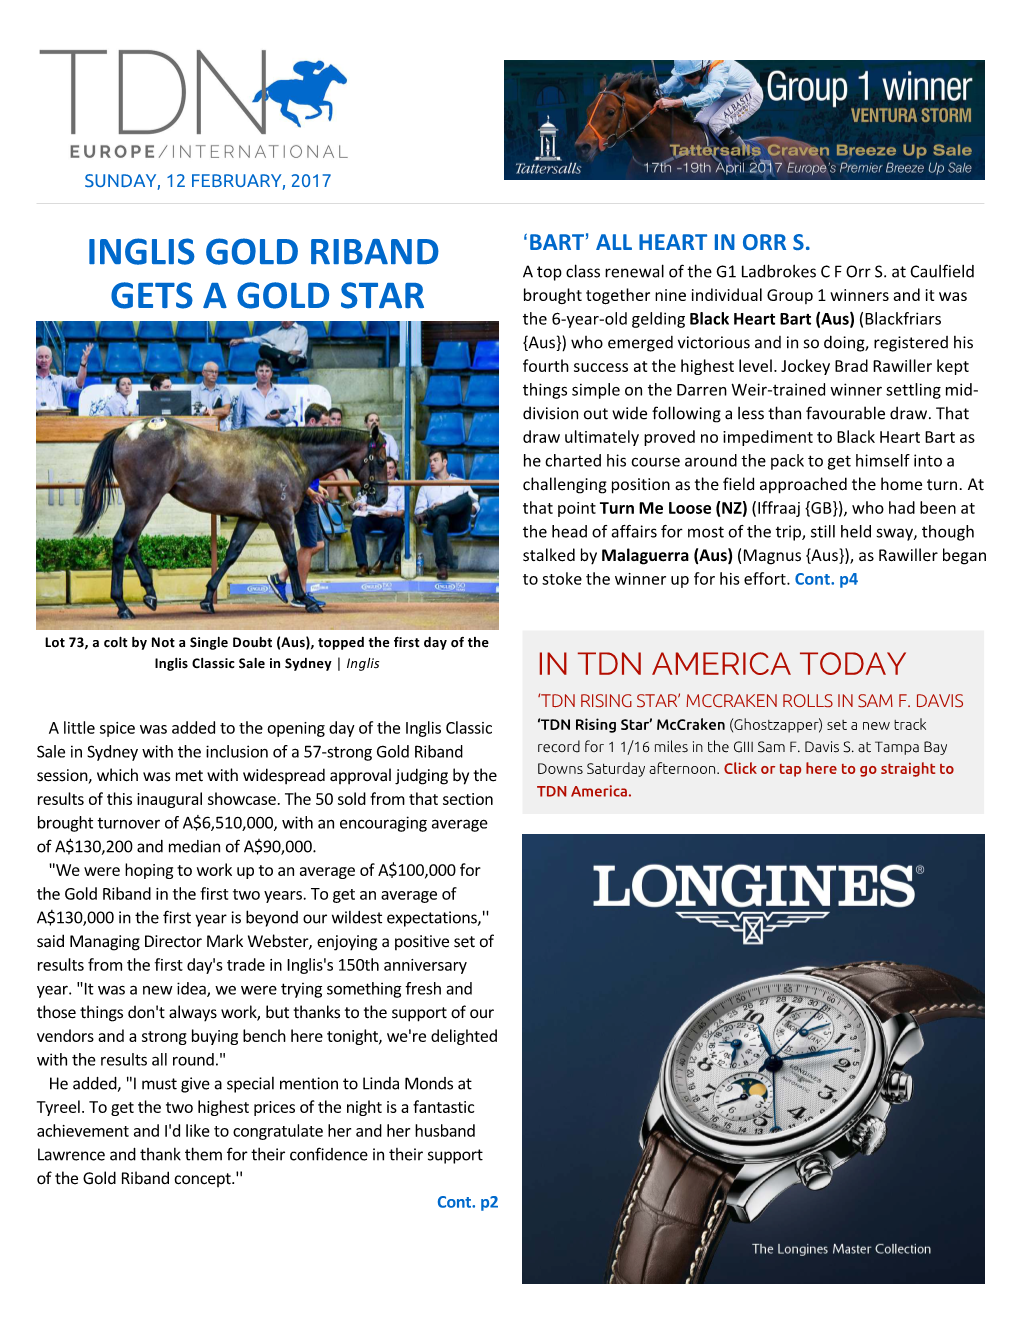 Inglis Gold Riband Gets a Gold Star Cont